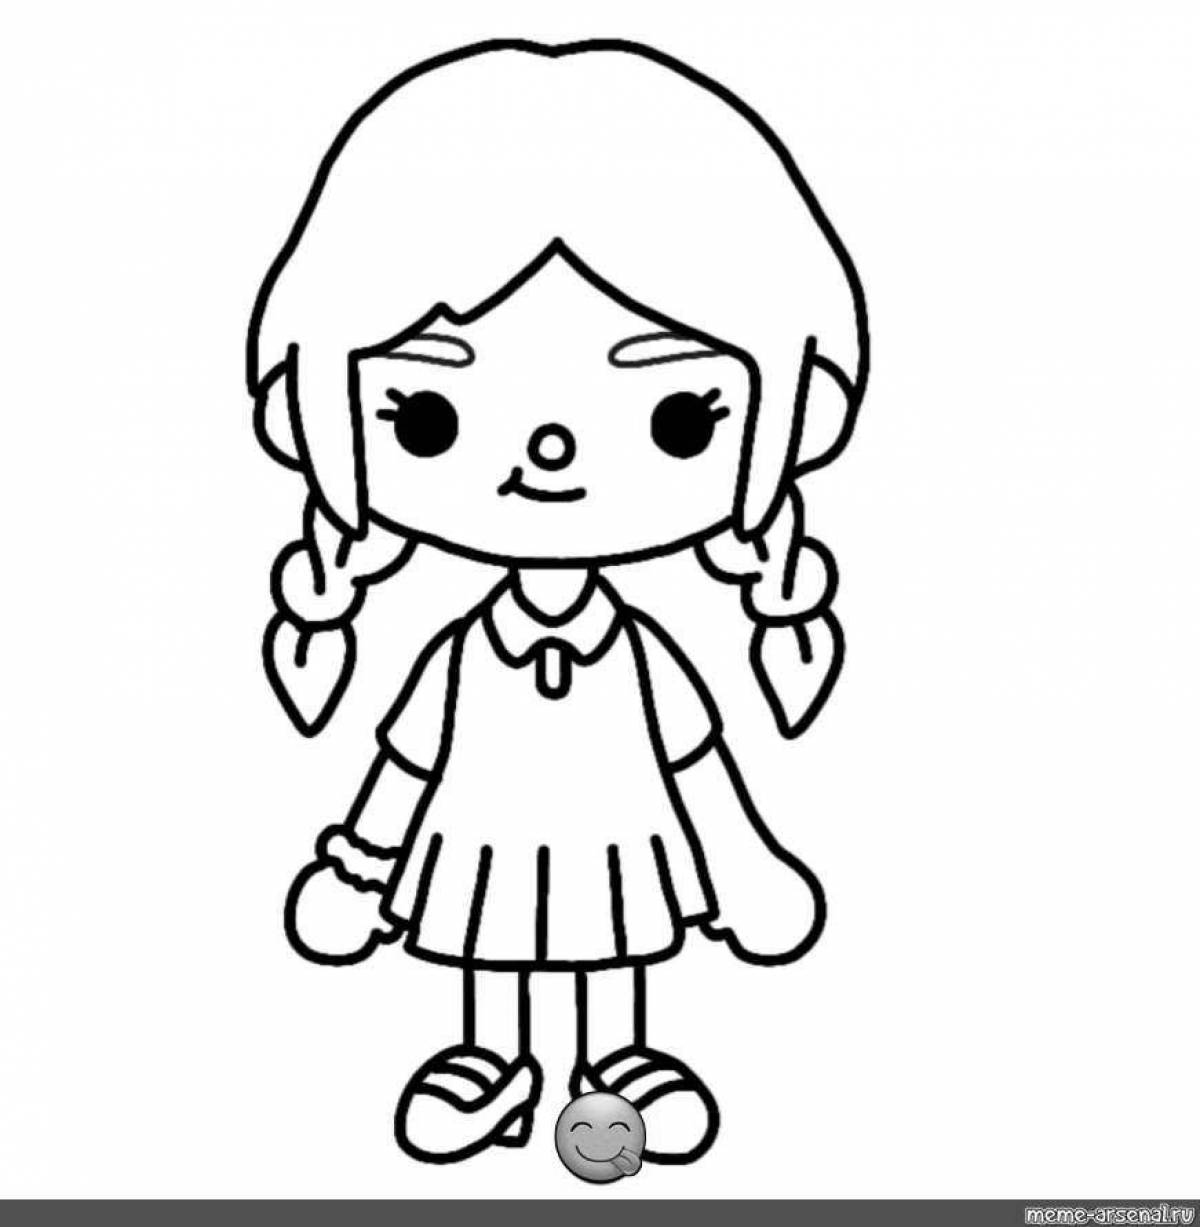 A brightly colored coloring page with a photo of the current side